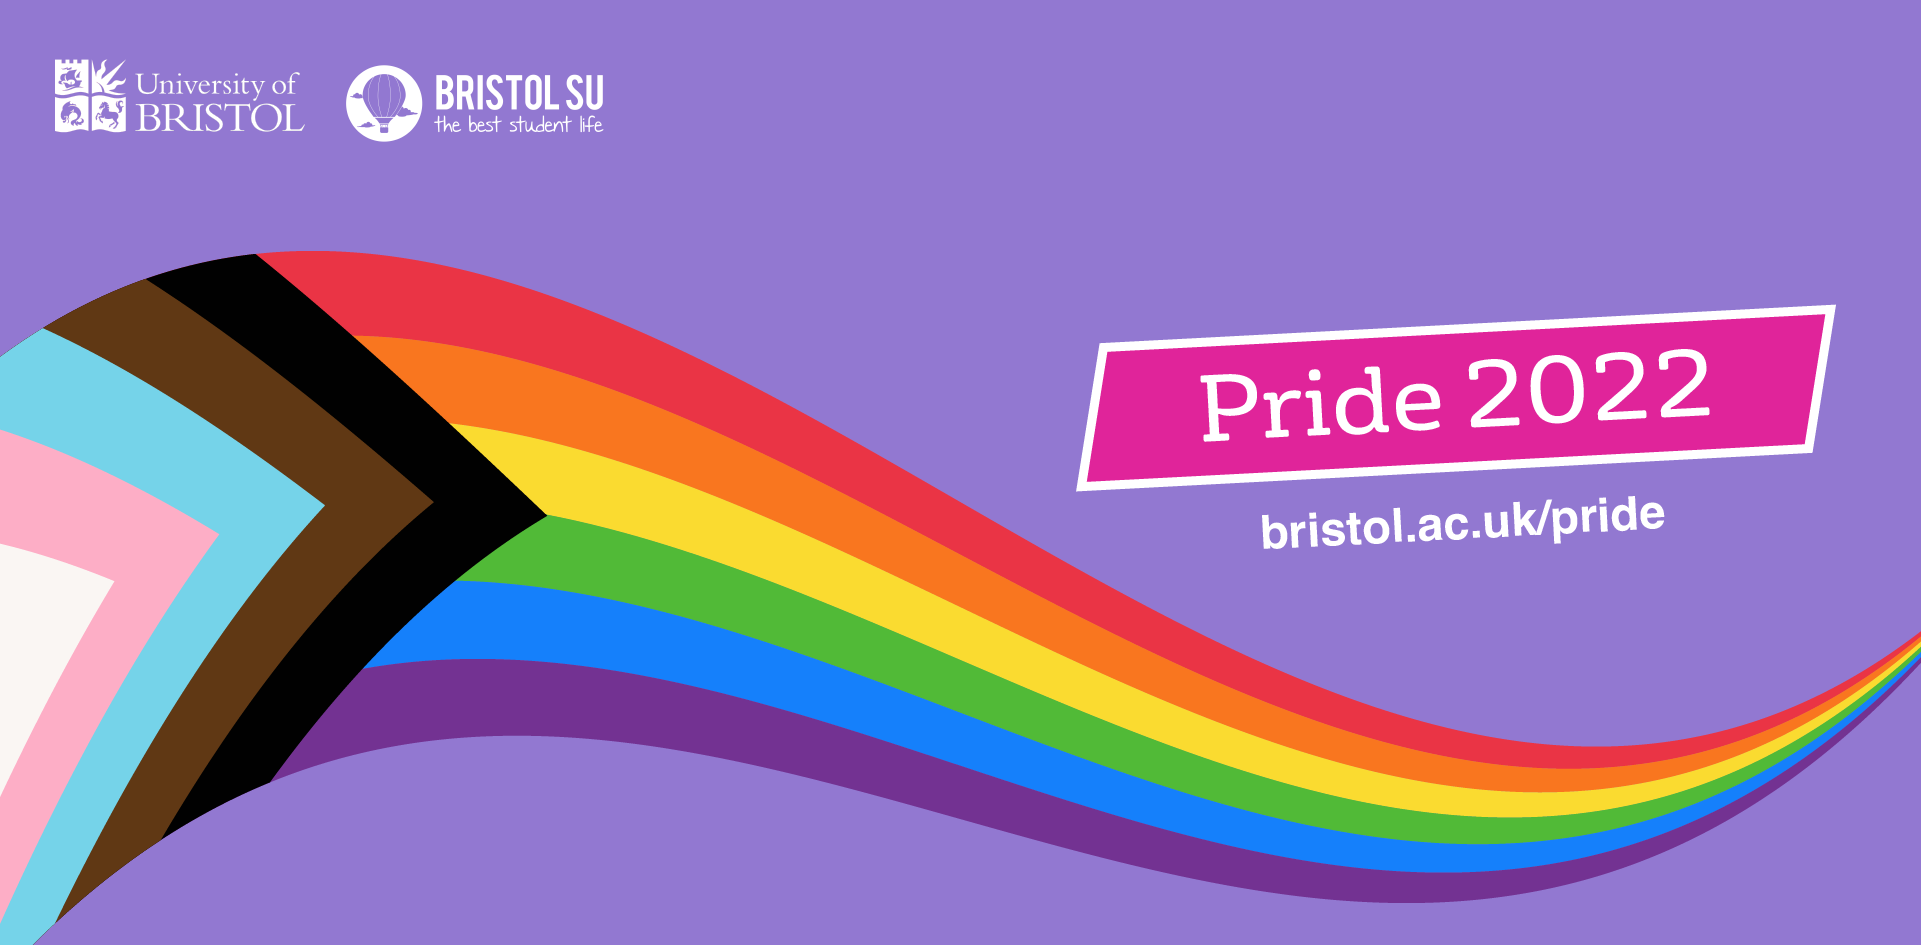 Pride 2022 at the University of Bristol banner, featuring a stylisation of the Pride flag.